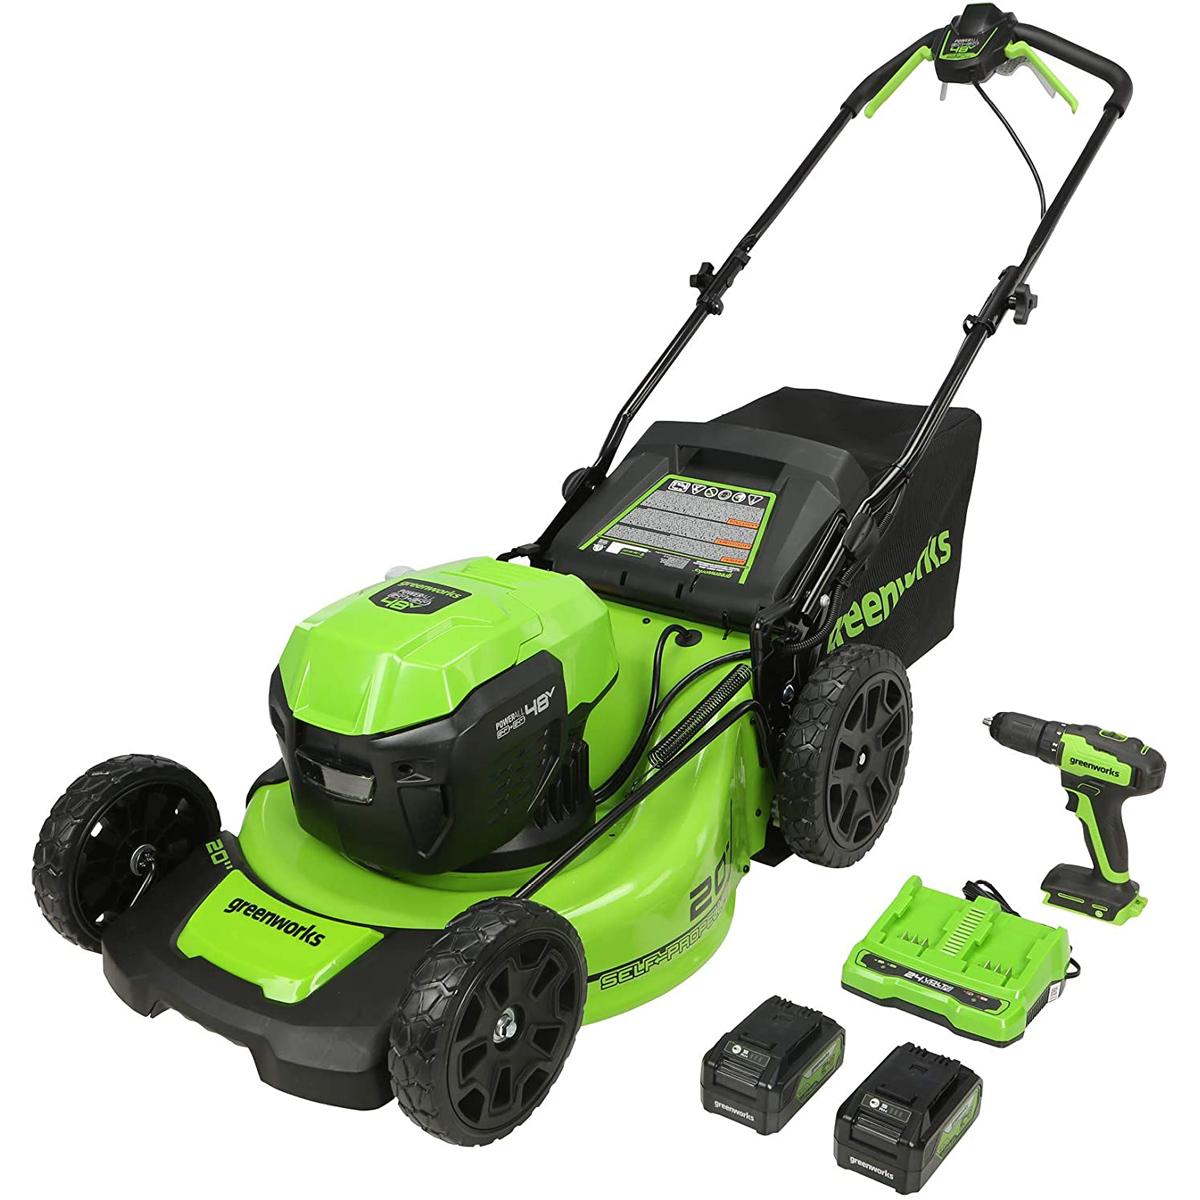 Greenworks 20-inch Brushless Push Mower for $279.99 Shipped